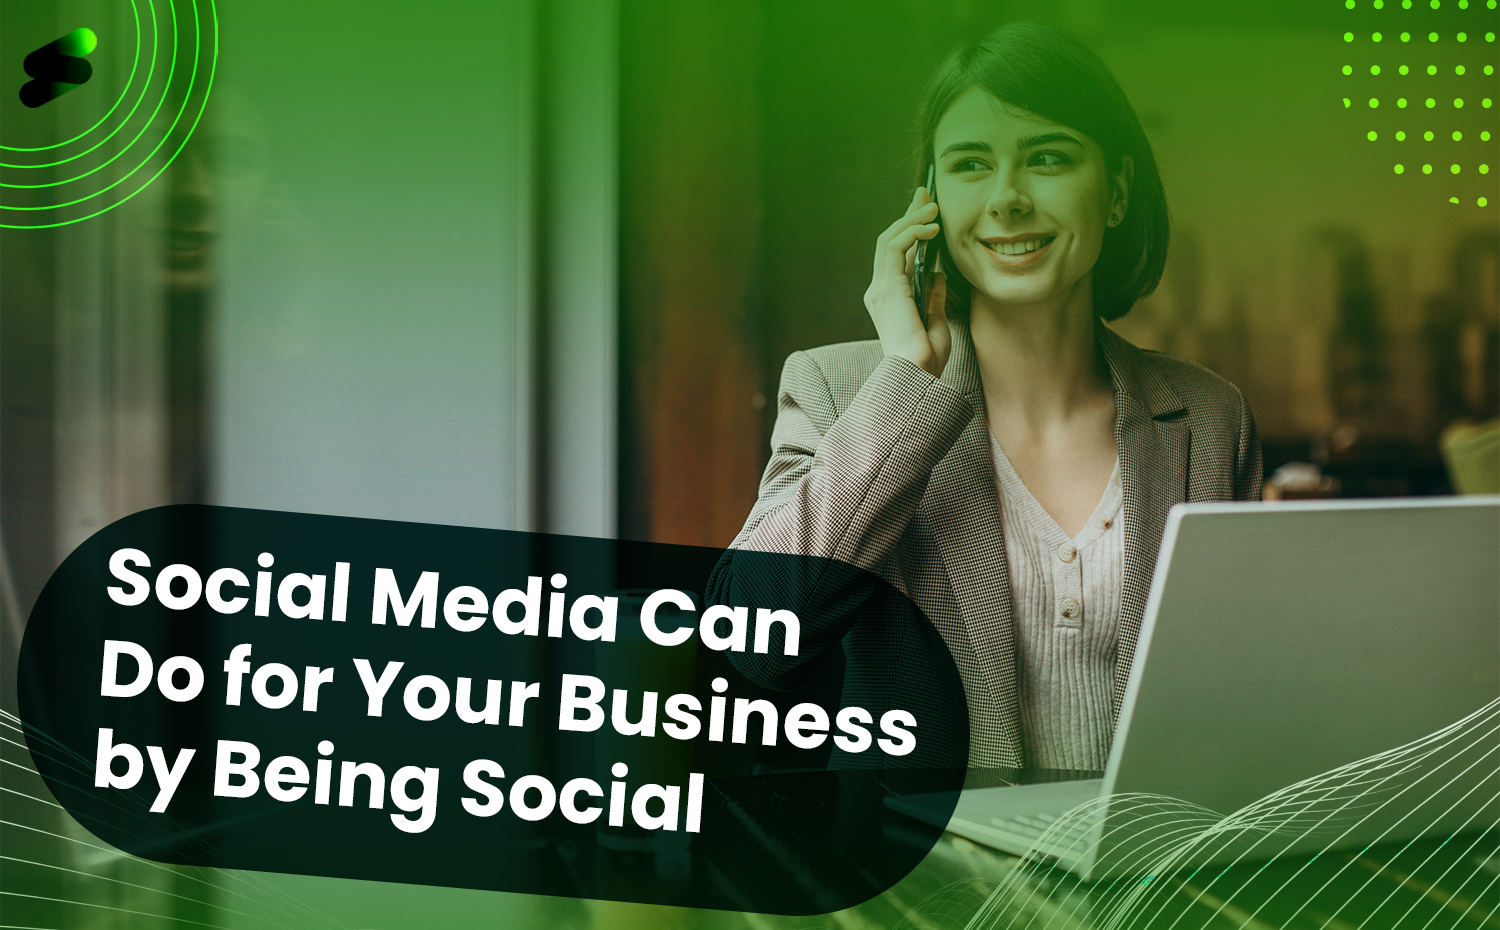 Find Out What Social Media Can Do for Your Business by Being Social?